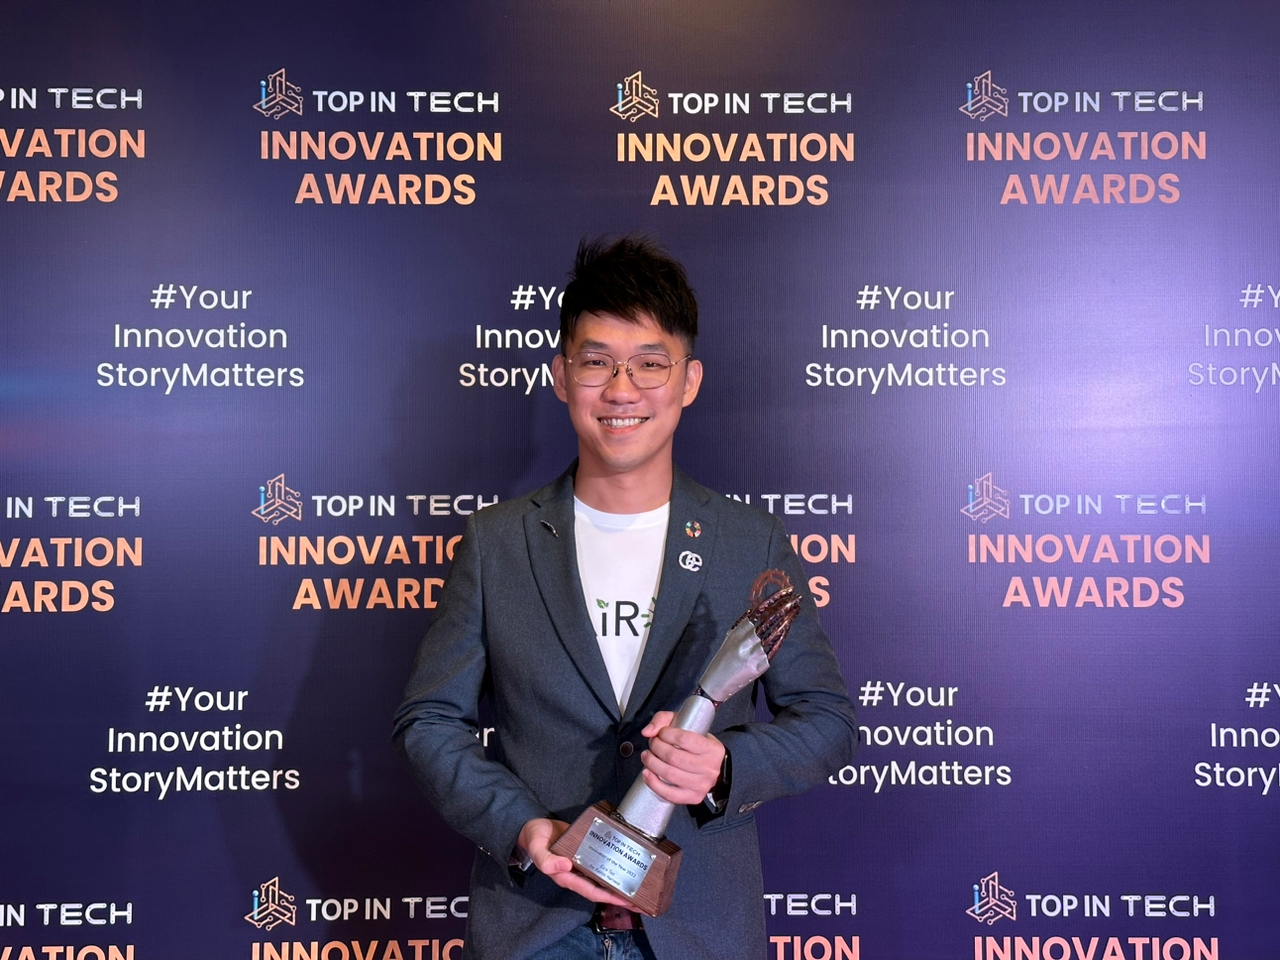 Top In Tech Innovation Awards continues honouring excellence in the tech space